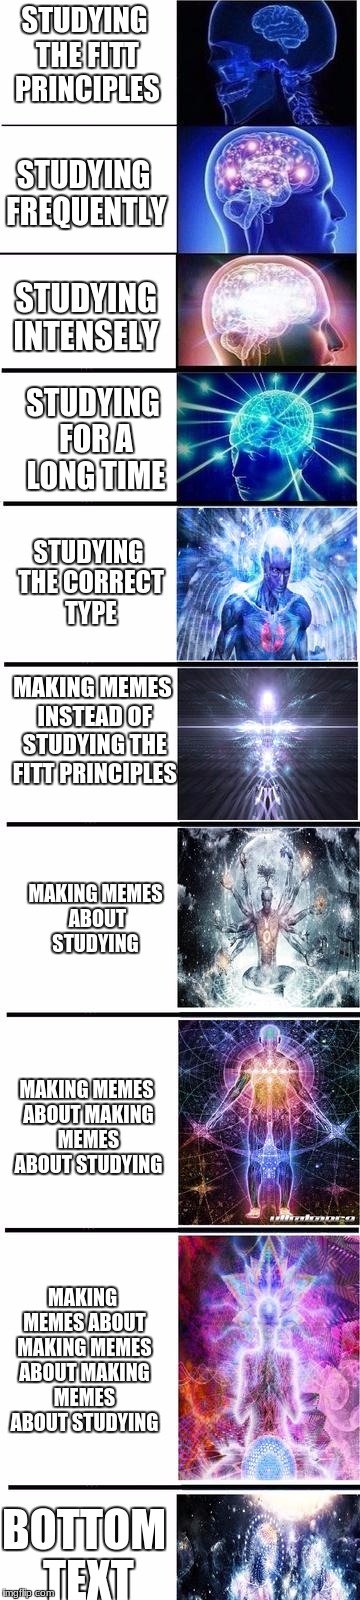 expanding brain | STUDYING THE FITT PRINCIPLES; STUDYING FREQUENTLY; STUDYING INTENSELY; STUDYING FOR A LONG TIME; STUDYING THE CORRECT TYPE; MAKING MEMES INSTEAD OF STUDYING THE FITT PRINCIPLES; MAKING MEMES ABOUT STUDYING; MAKING MEMES ABOUT MAKING MEMES ABOUT STUDYING; MAKING MEMES ABOUT MAKING MEMES ABOUT MAKING MEMES ABOUT STUDYING; BOTTOM TEXT | image tagged in expanding brain | made w/ Imgflip meme maker